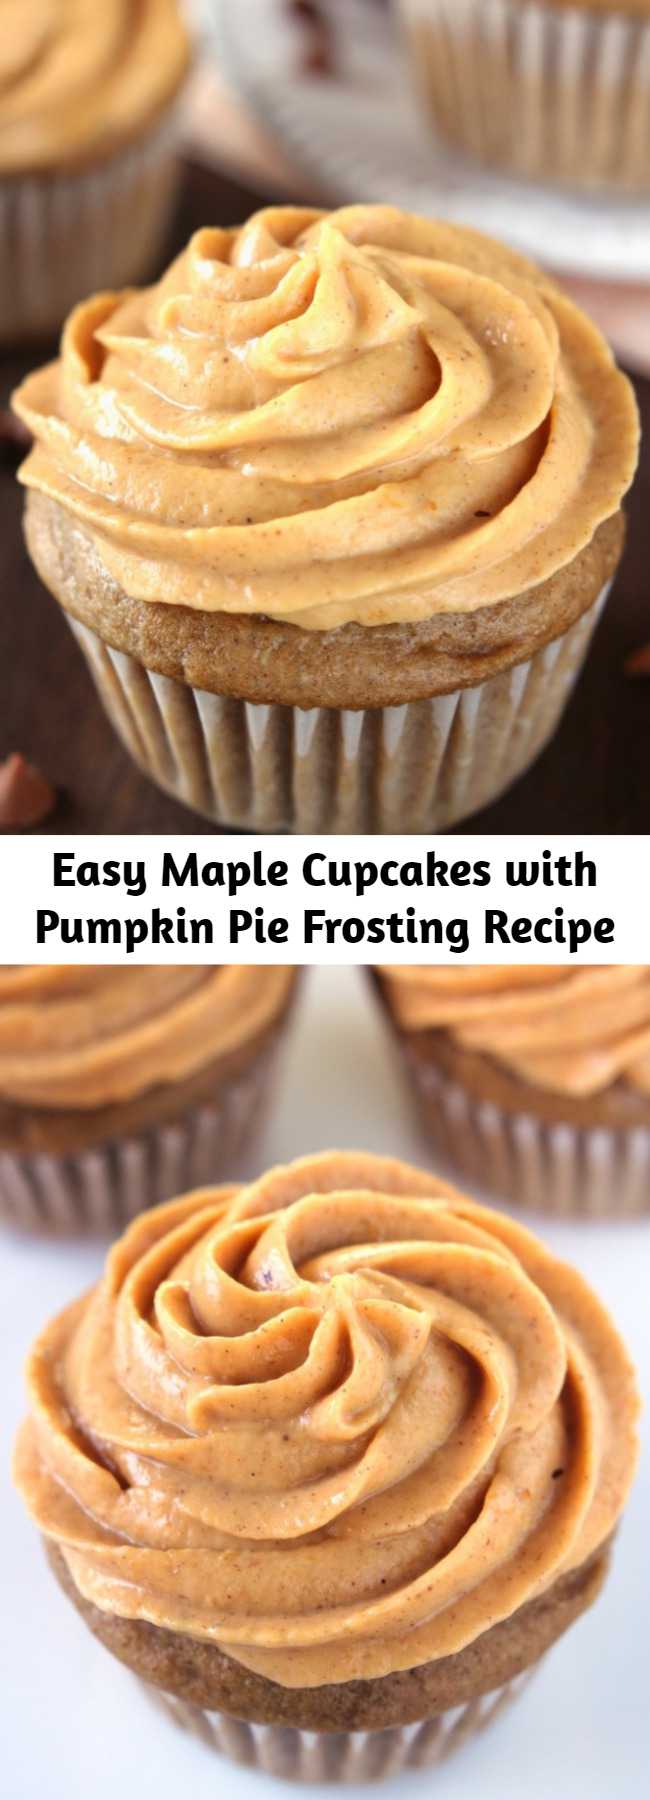 Easy Maple Cupcakes with Pumpkin Pie Frosting Recipe - Easy, lightened-up cupcakes filled with fall flavors! Sweet, cozy & the perfect comfort food treat. Just wait ’til you try that creamy frosting! The creamy frosting tastes even better than pumpkin pie on Thanksgiving! They’re best if eaten the same day they’re assembled, but you can store any leftovers in an airtight container in the refrigerator for up to 3 days.